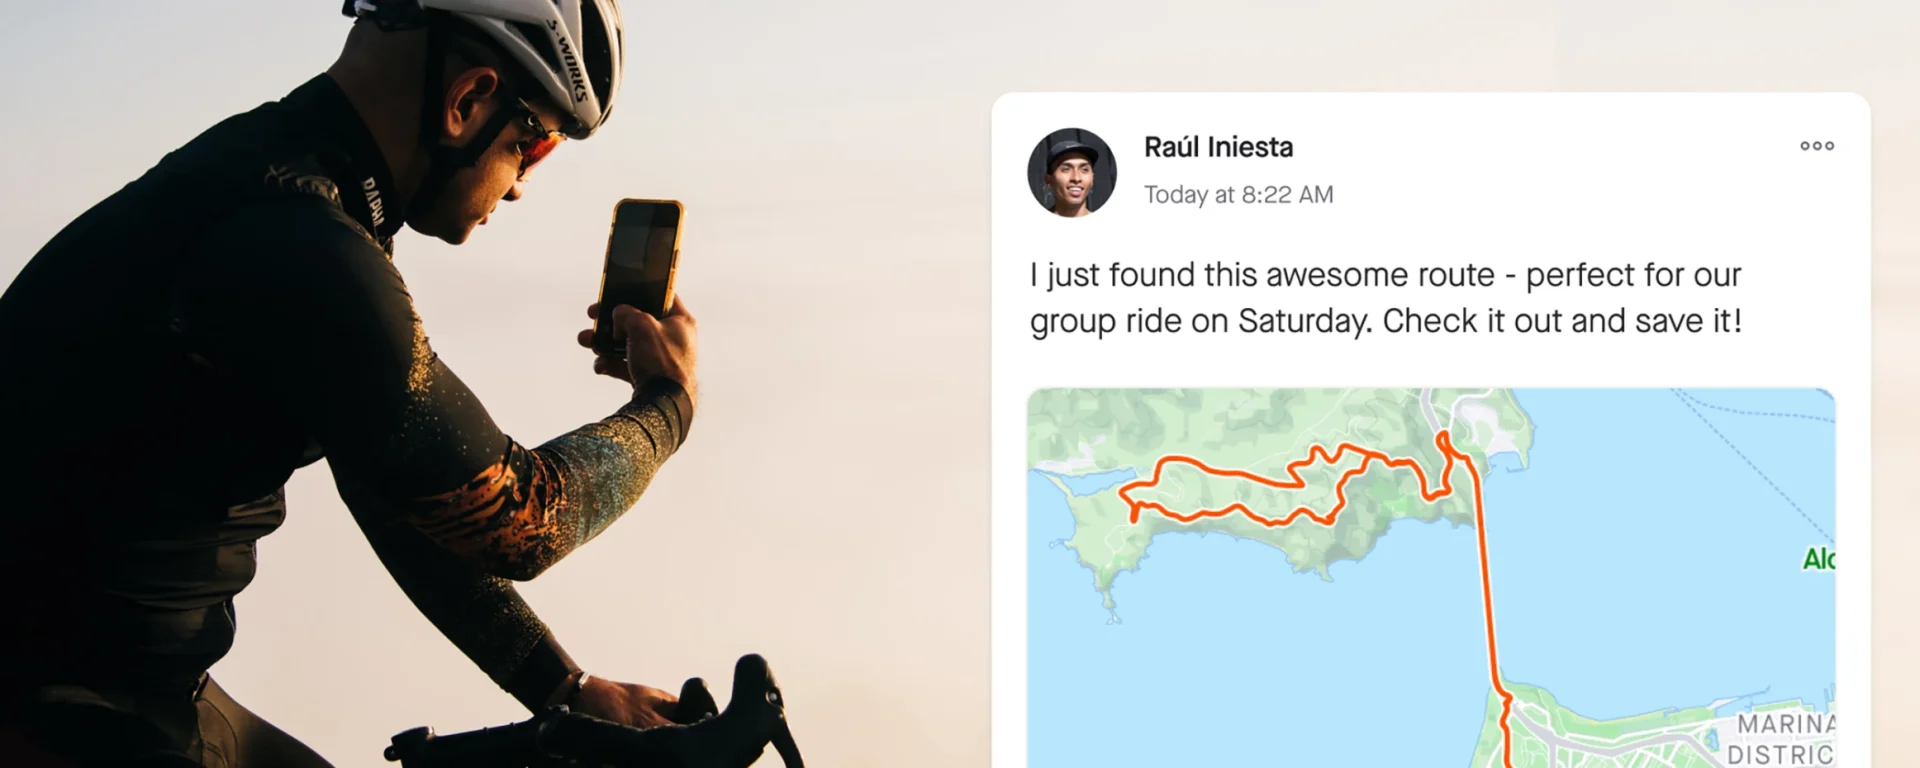 A screenshot from Strava's announcement of a new feature to share route information and photos. It shows a cyclist looking at his phone, while on the right side of the image is a post from an athlete saying "I just found this awesome route - perfect for our group ride on Saturday. Check it out and save it!" with an overlay of a ride route file.